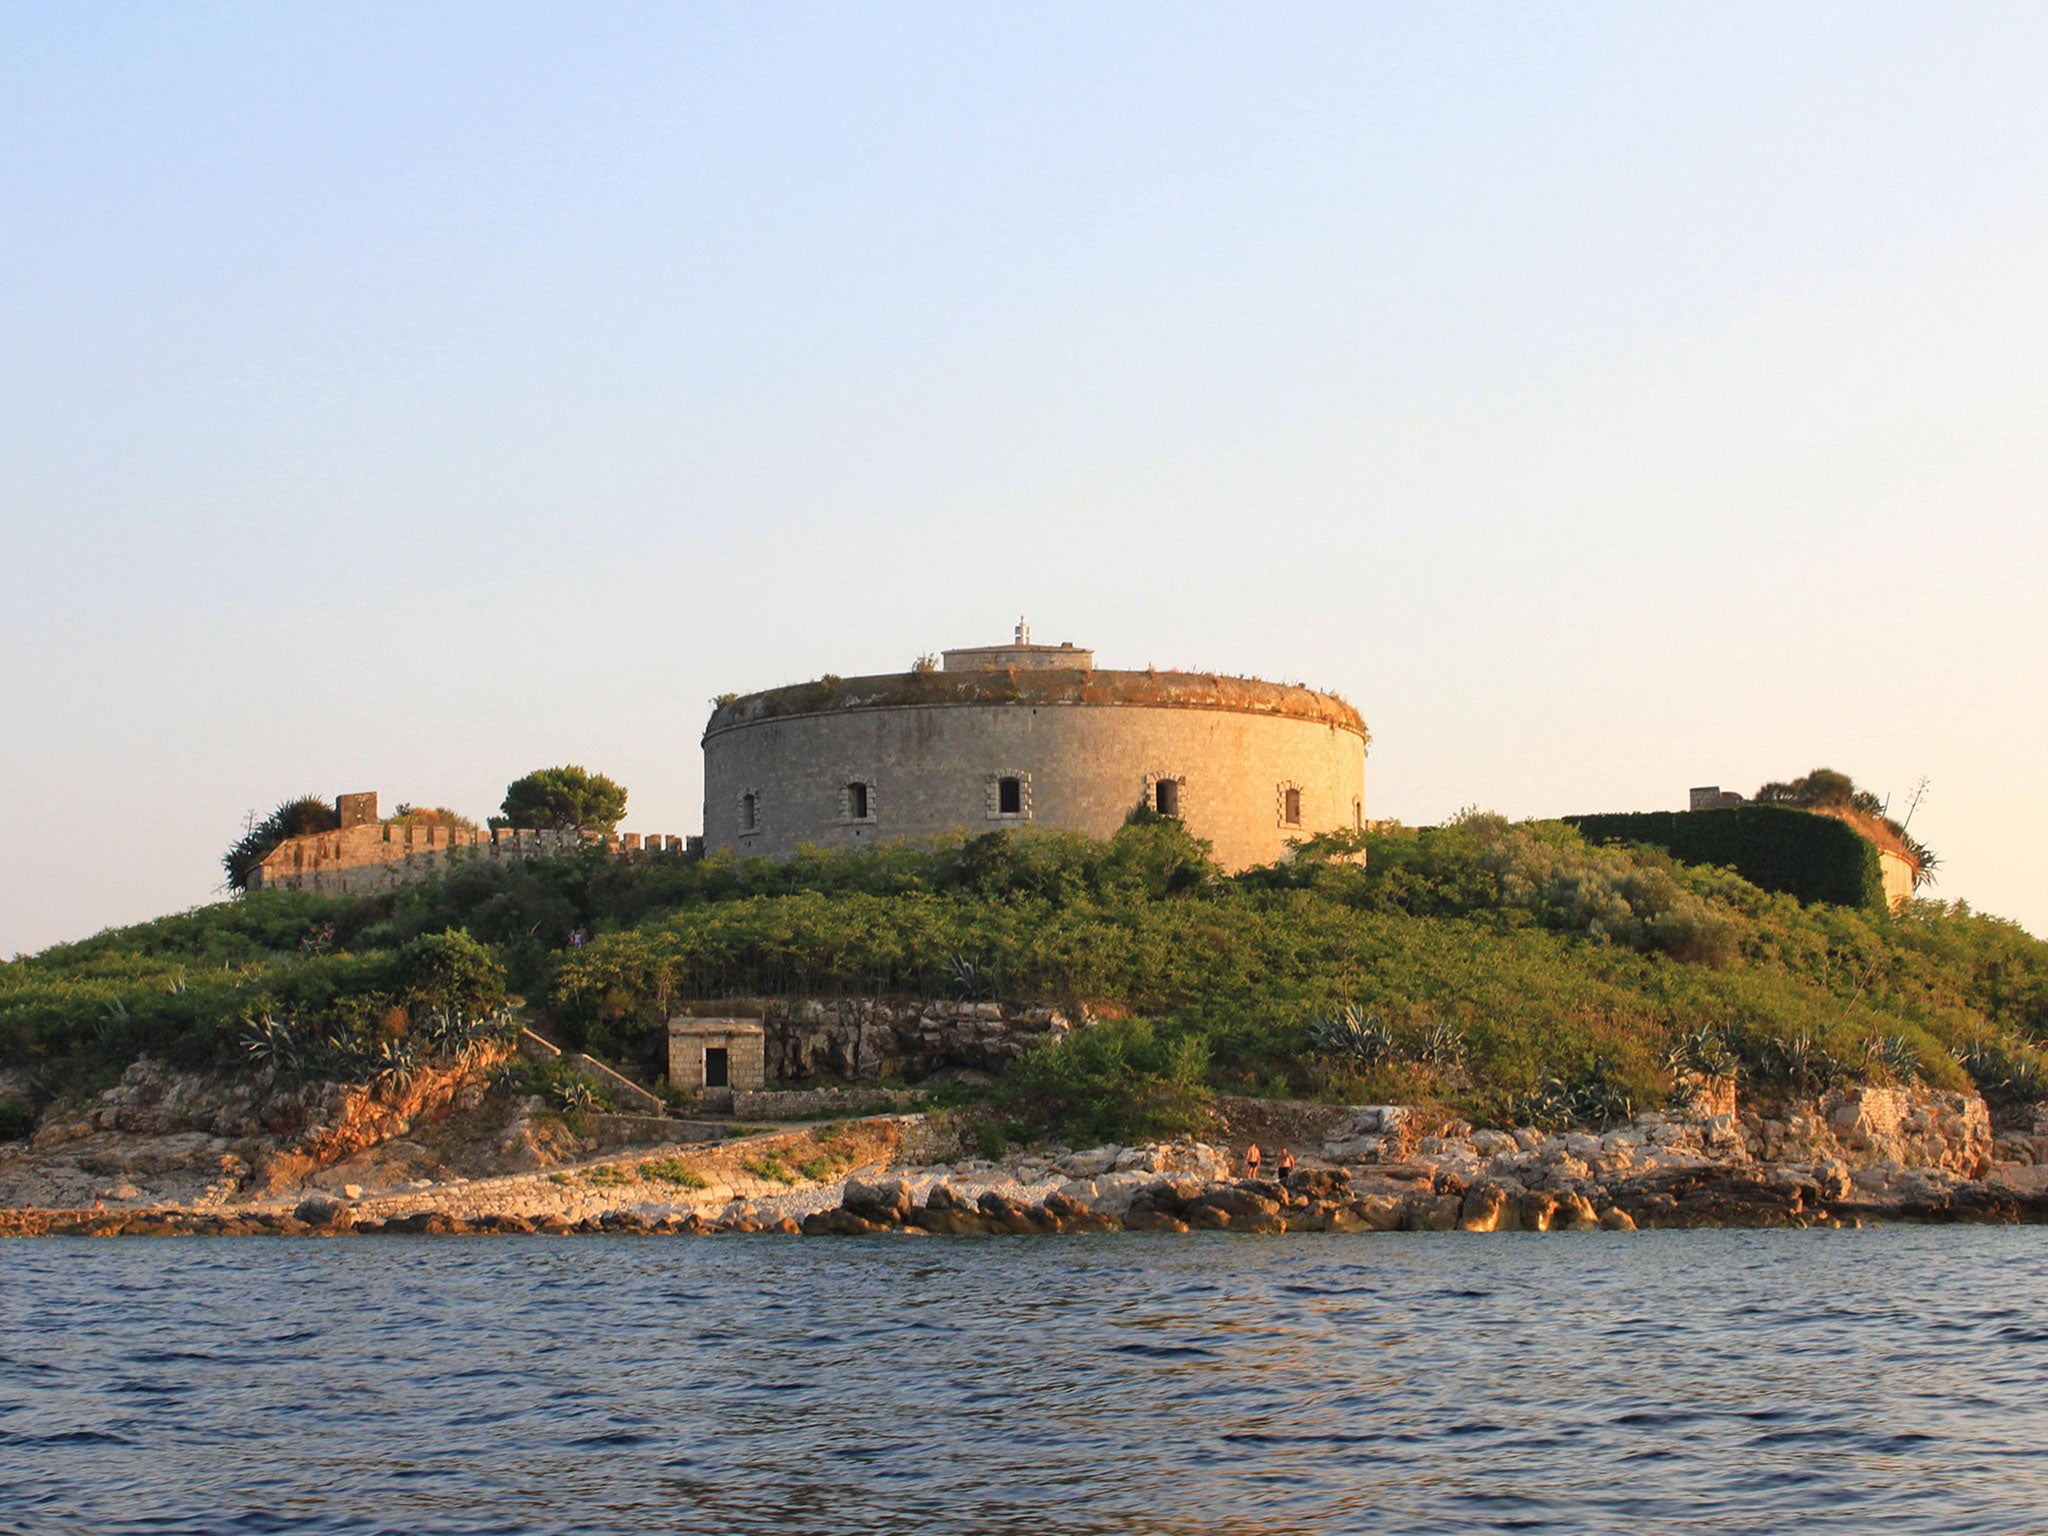 Fort Mamula was used as a concentration camp during the Italian occupation of Montenegro in the Second World War